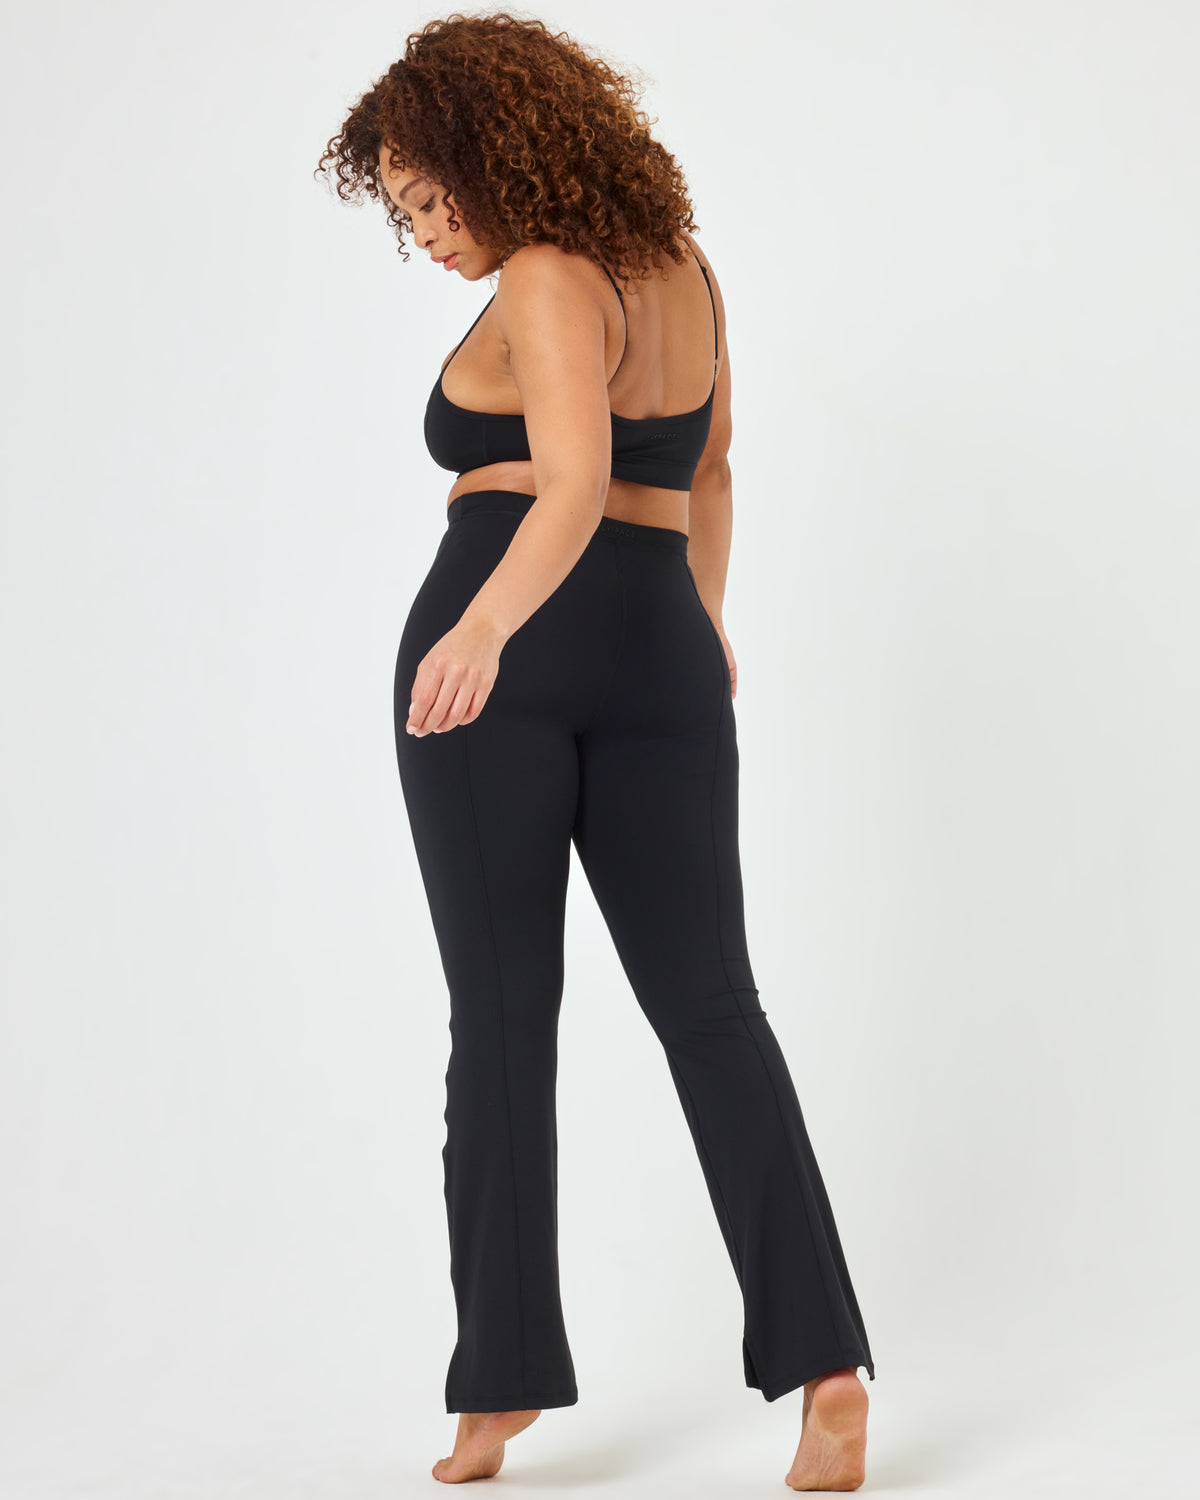 Product  LSPACE In Play Legging - Black